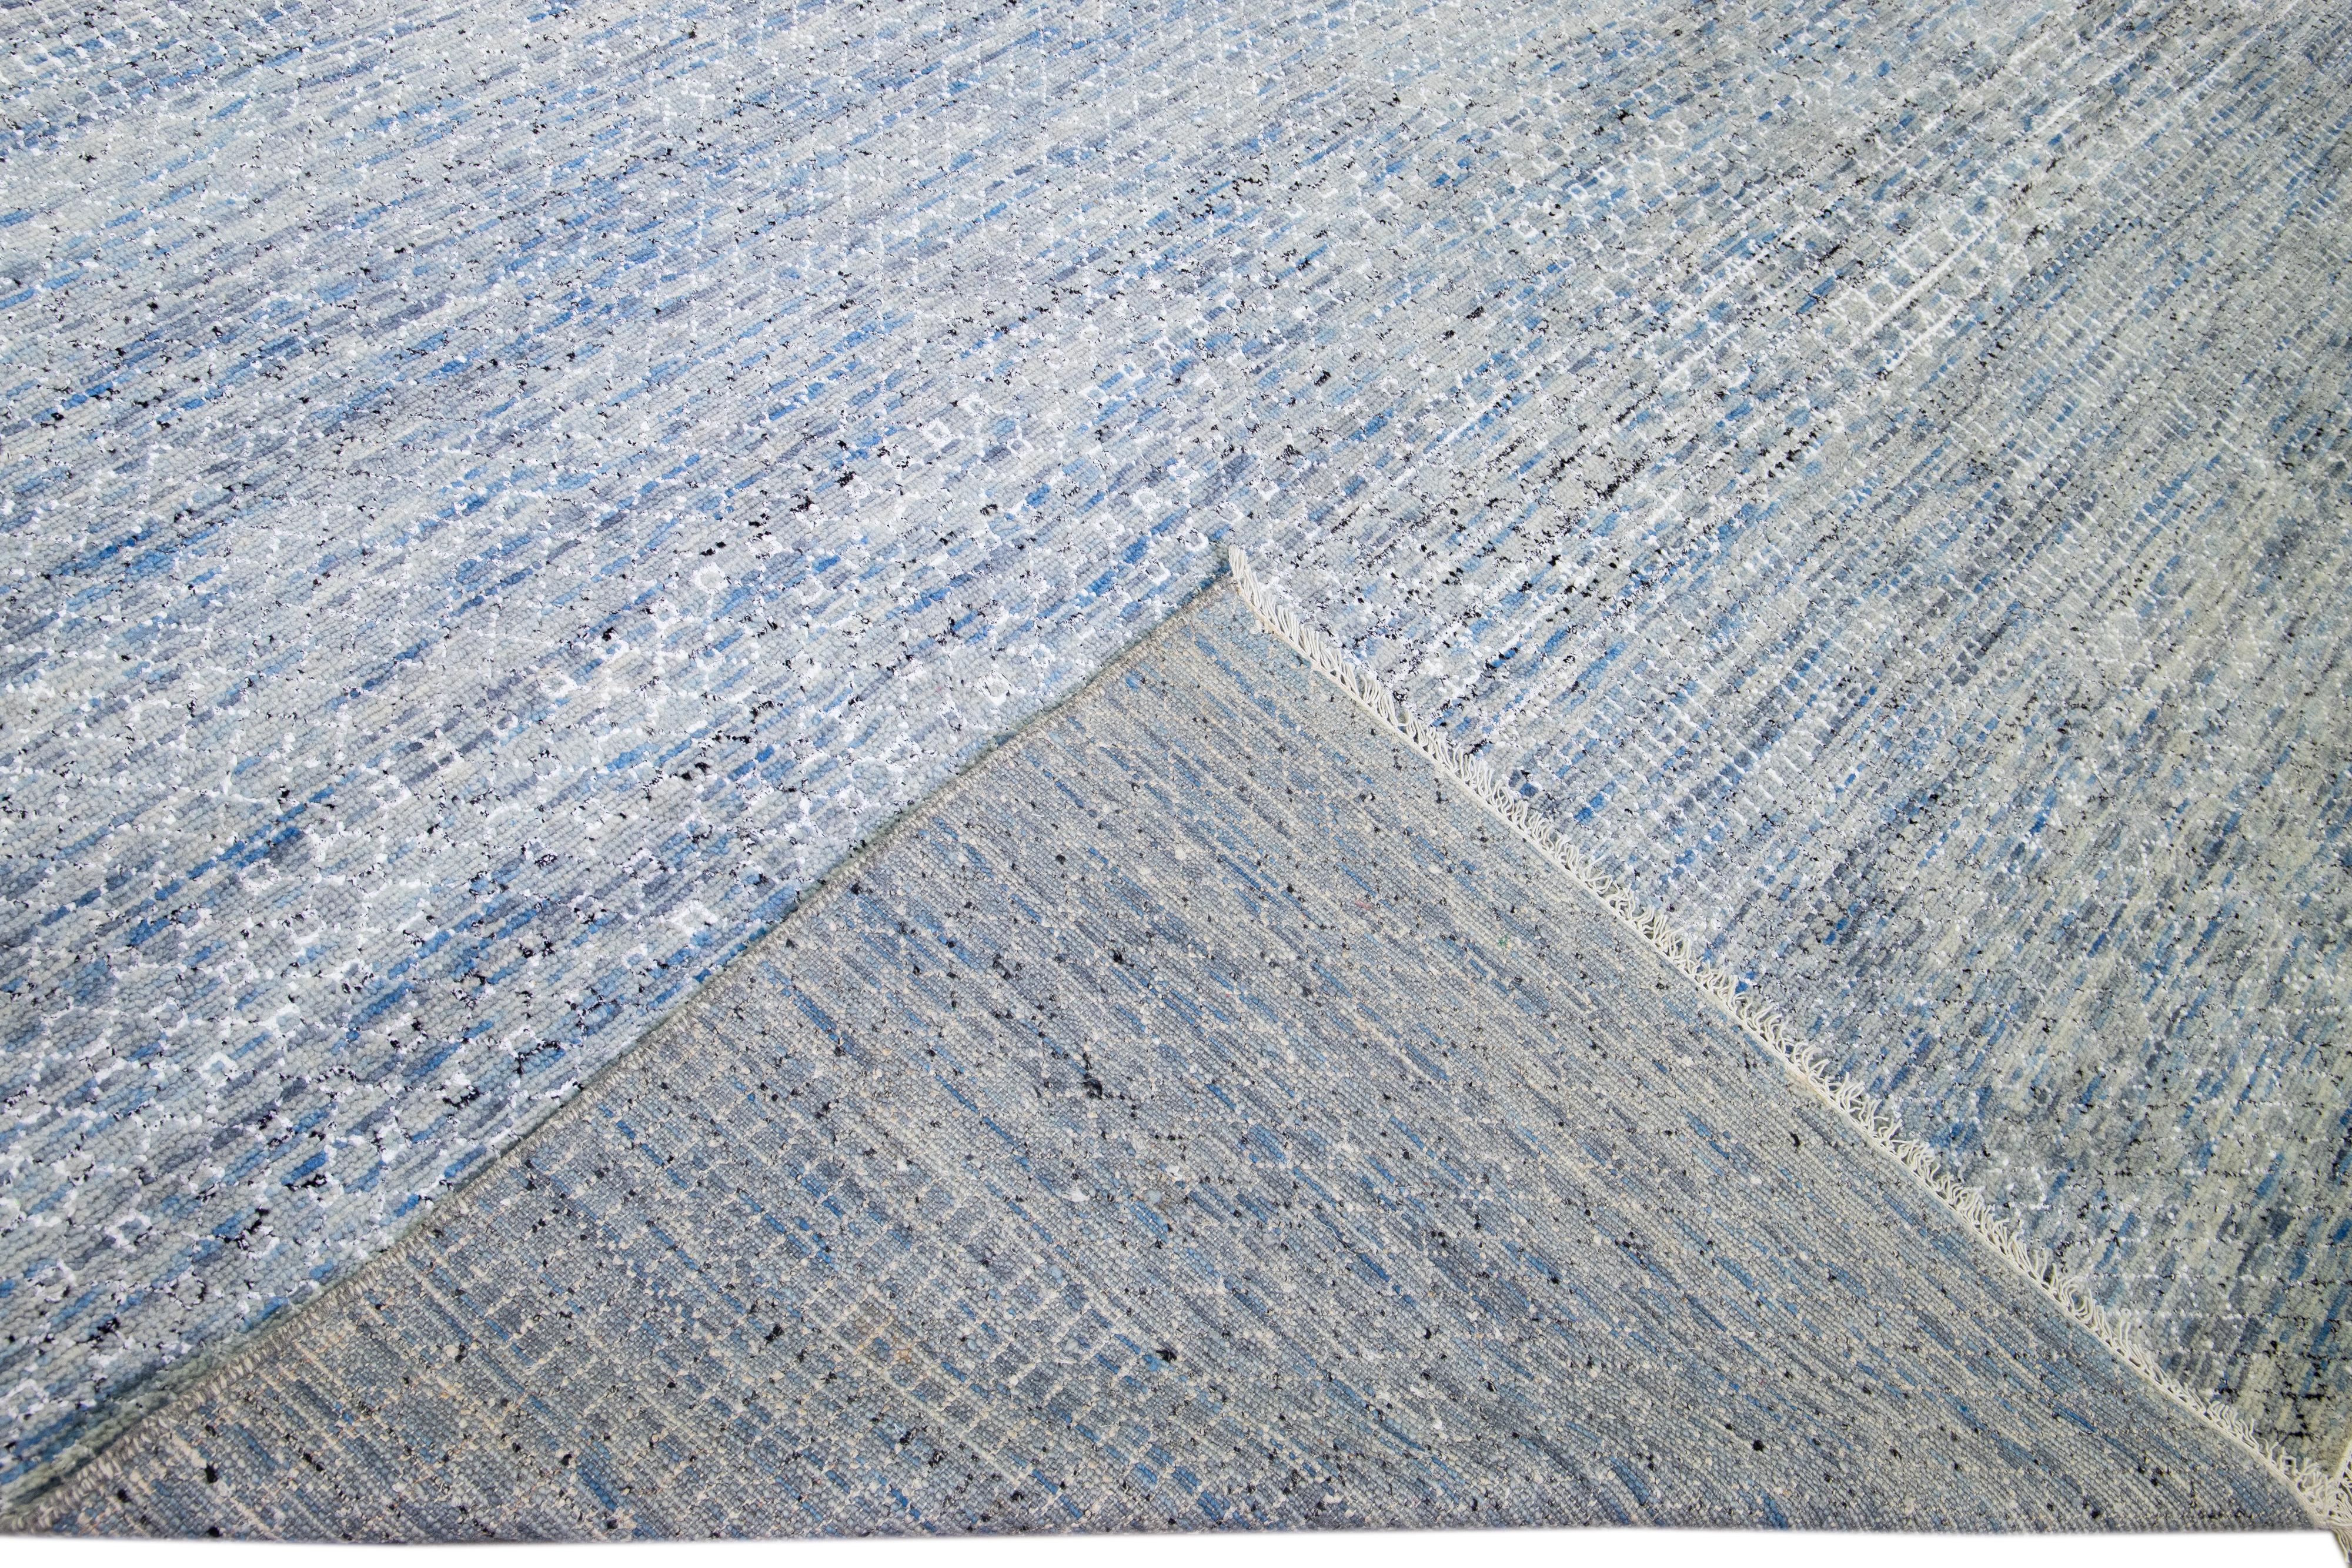 Beautiful Contemporary Savannah hand-knotted wool rug with a finely detailed light blue field in an all-over white geometric pattern design.

This rug measures: 16'1